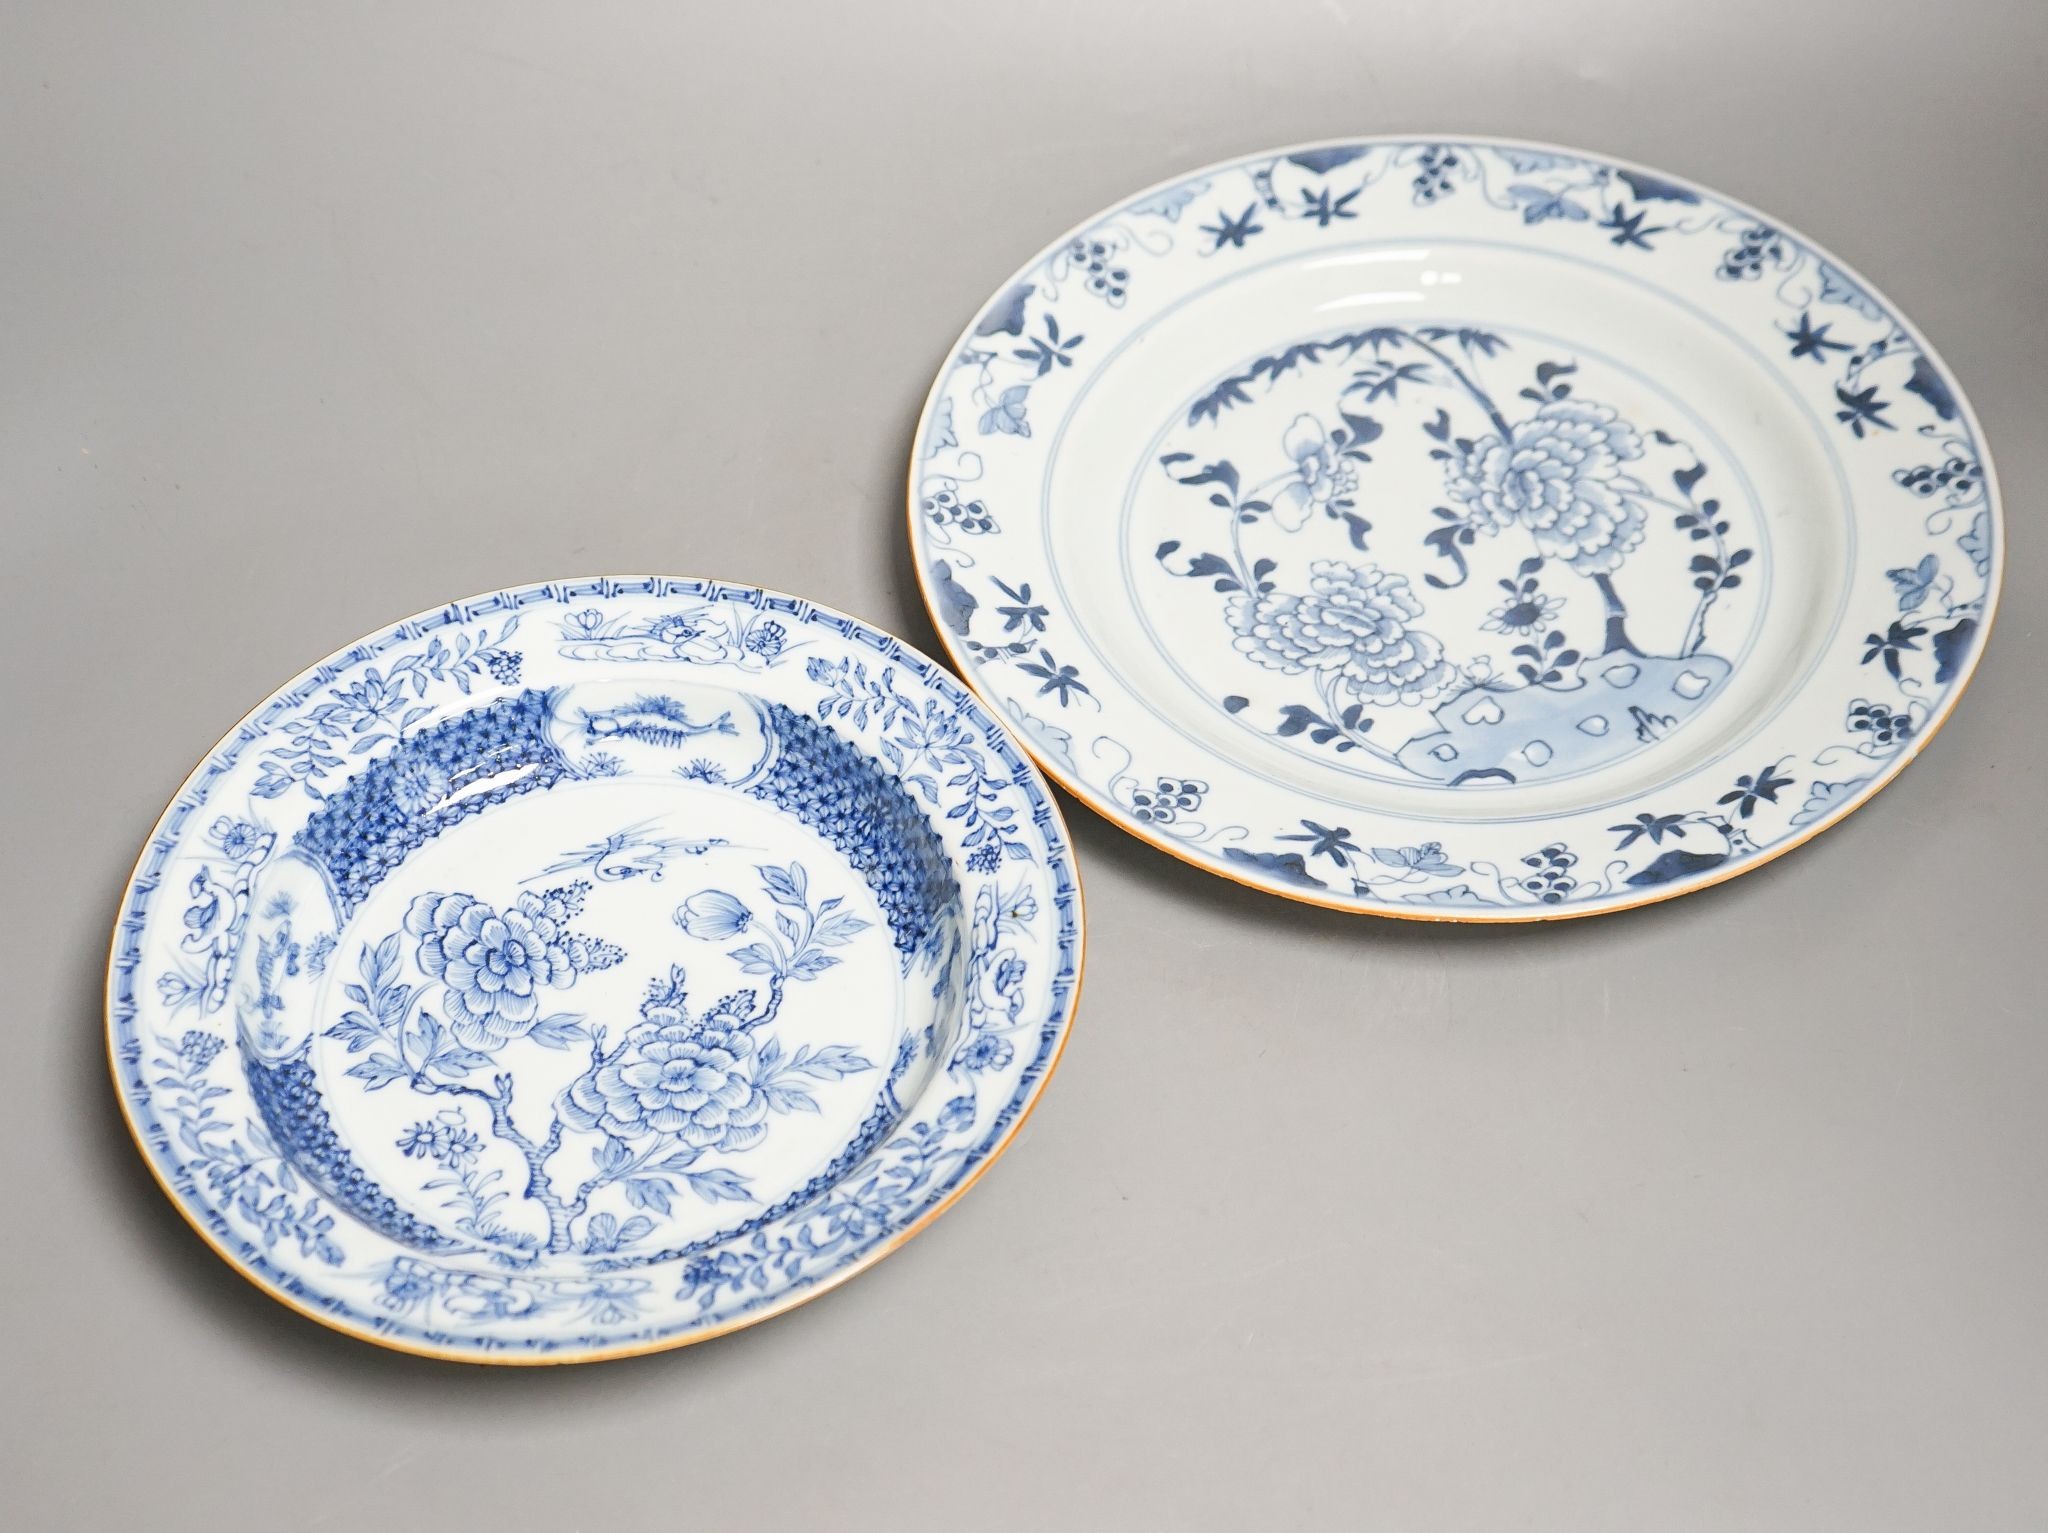 Two 18th century Chinese blue and white plates, largest 29cm diameter